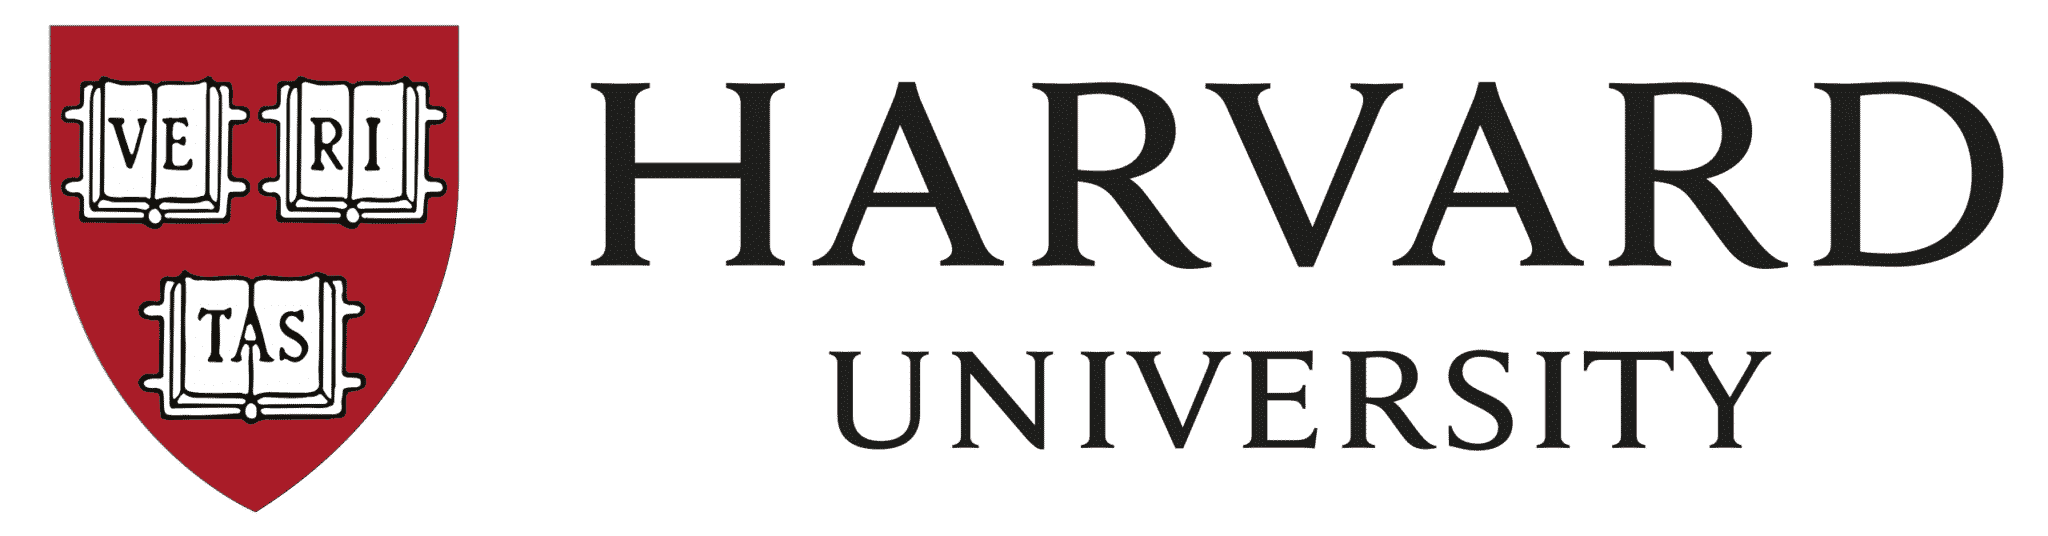 The image shows the logo of Harvard University with a crimson shield, three open books, and the word "VERITAS" on a green background.